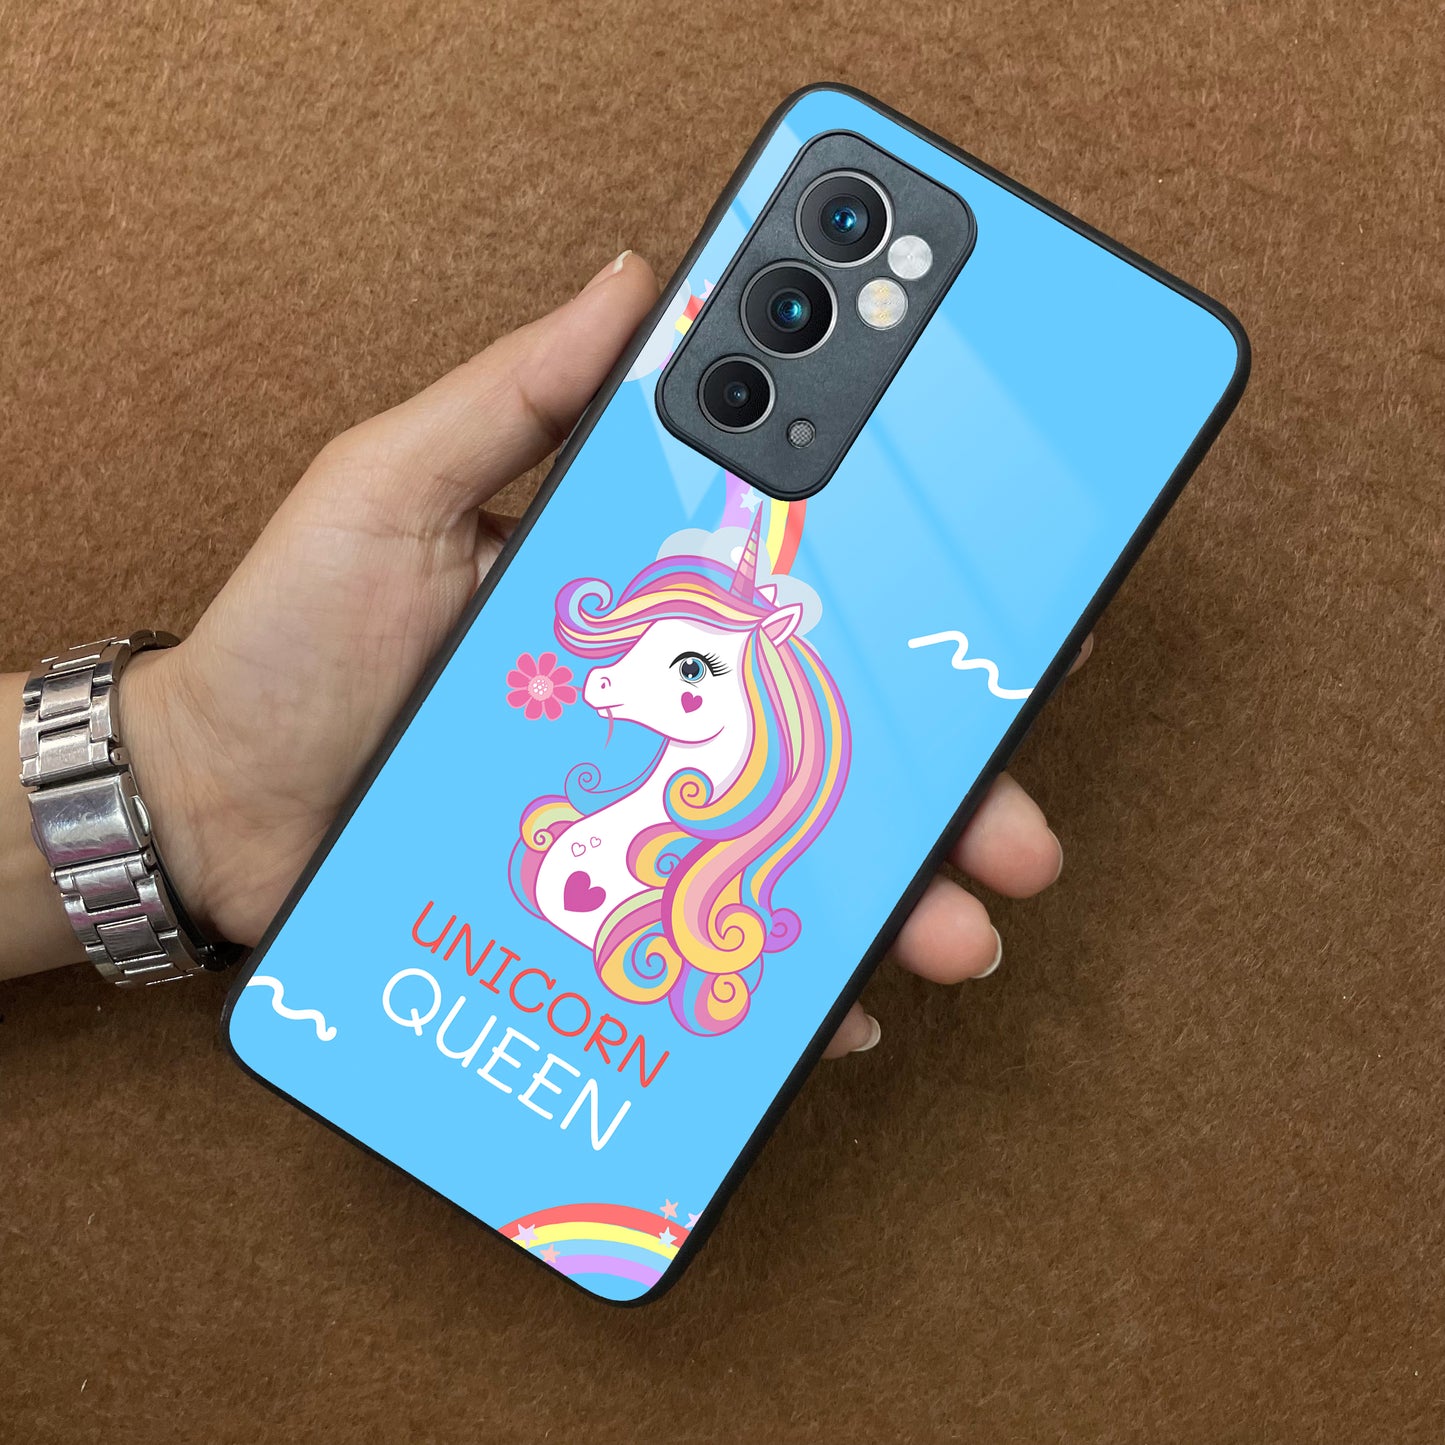 Blue Unicorn Queen Glass Phone Case For OnePlus